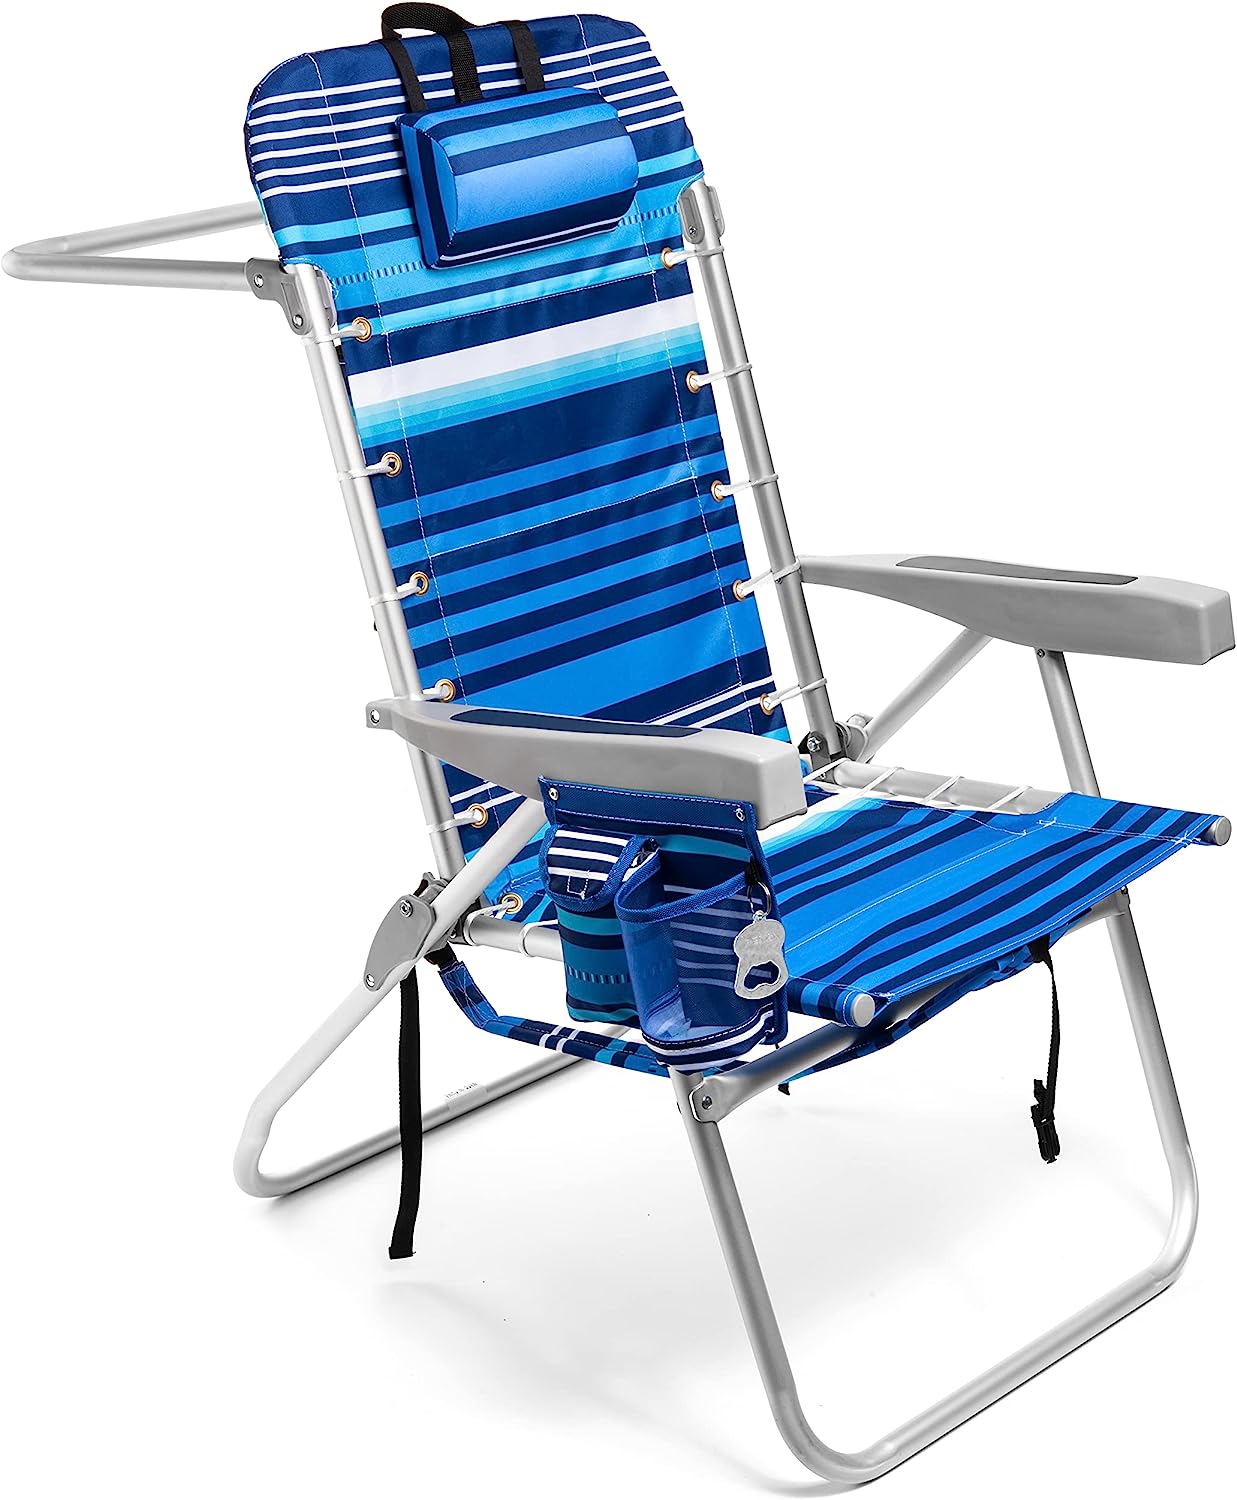 Homevative Folding Tall Backpack Beach Chair with 5 [...]